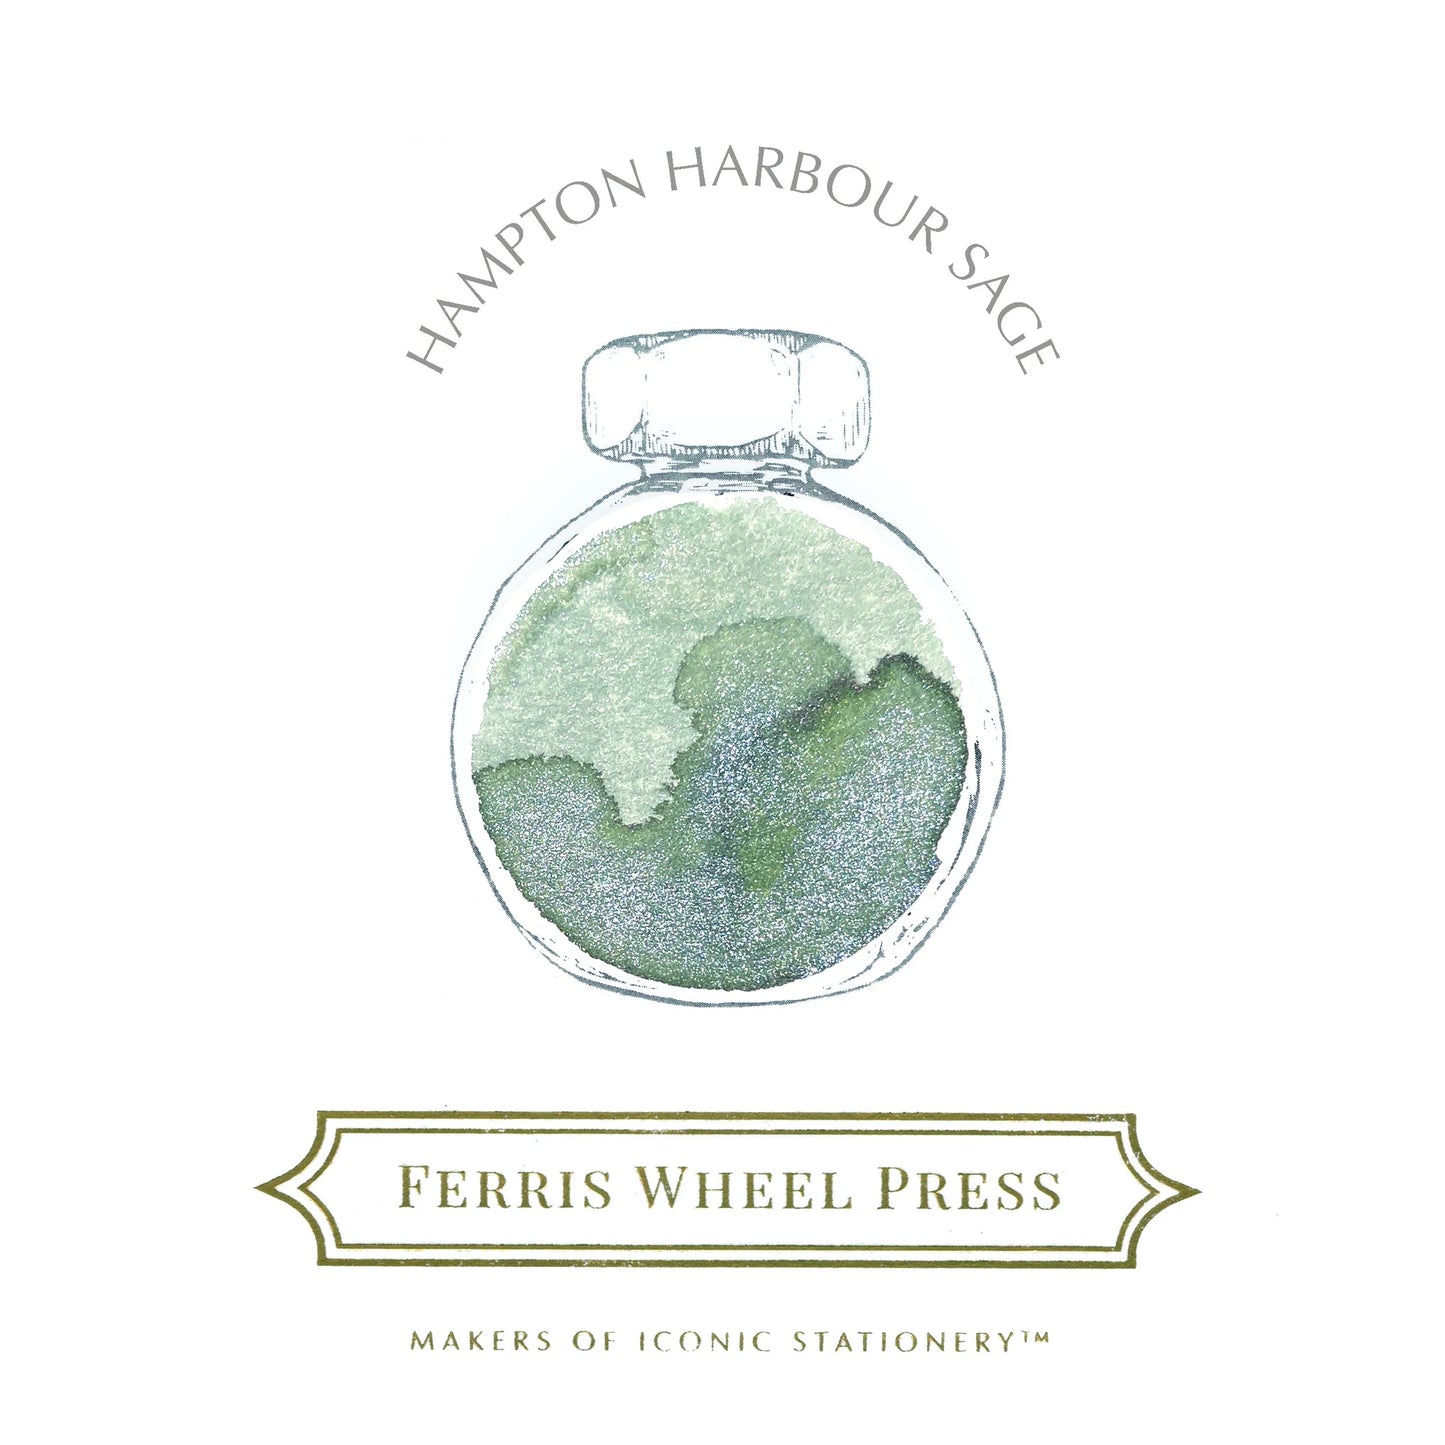 Ferris Wheel Press - Woven Warmth Collection - Ink Charger Set